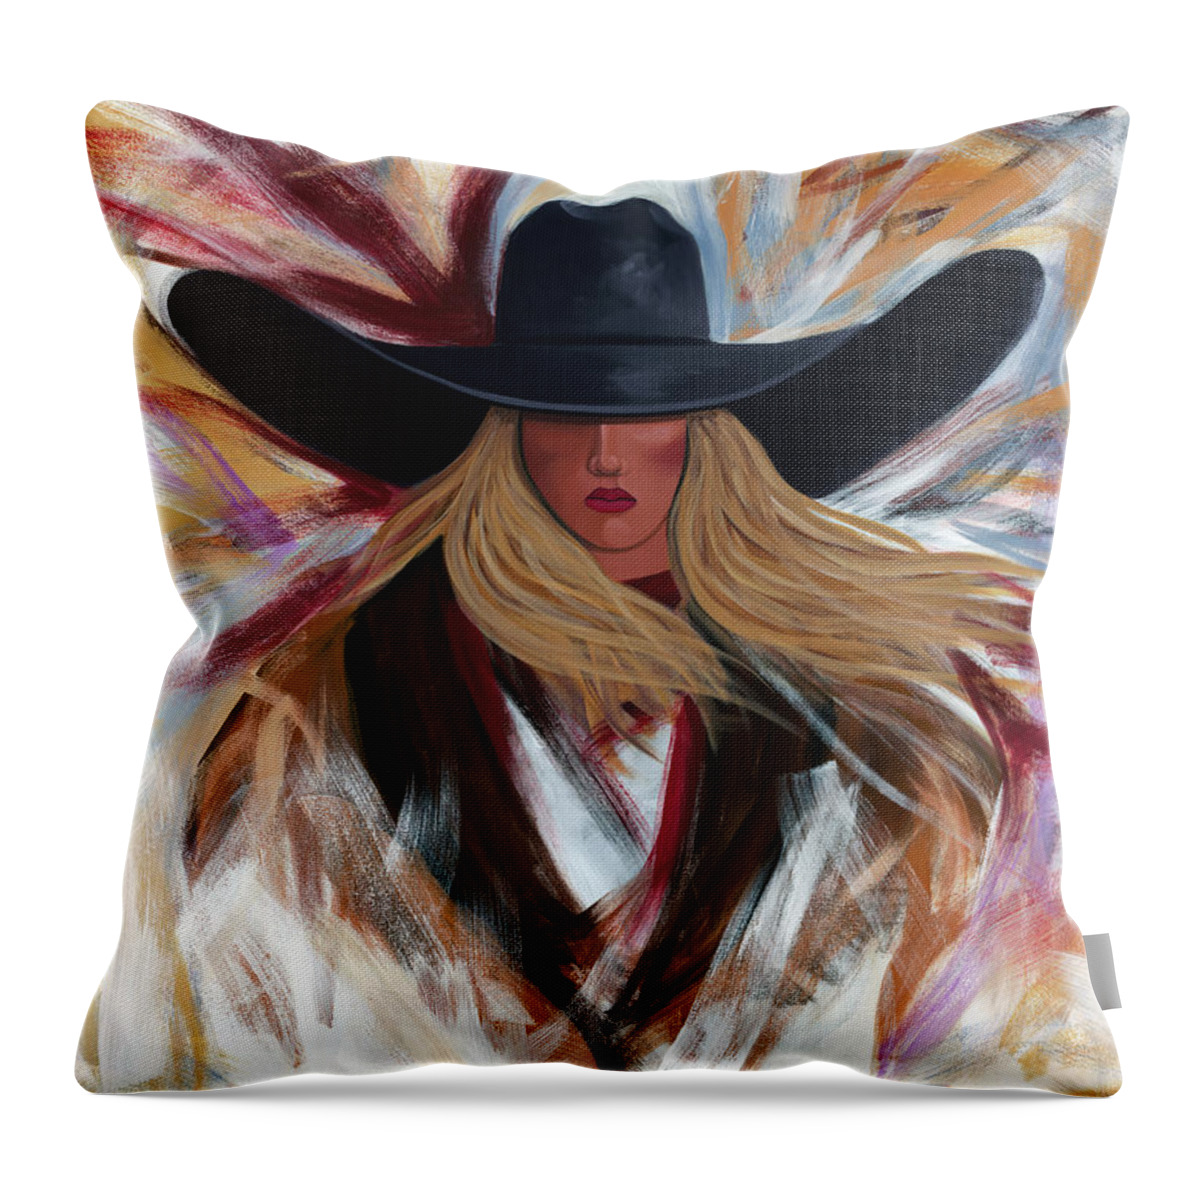 Colorful Cowboy Painting. Throw Pillow featuring the painting Cowgirl Colors by Lance Headlee